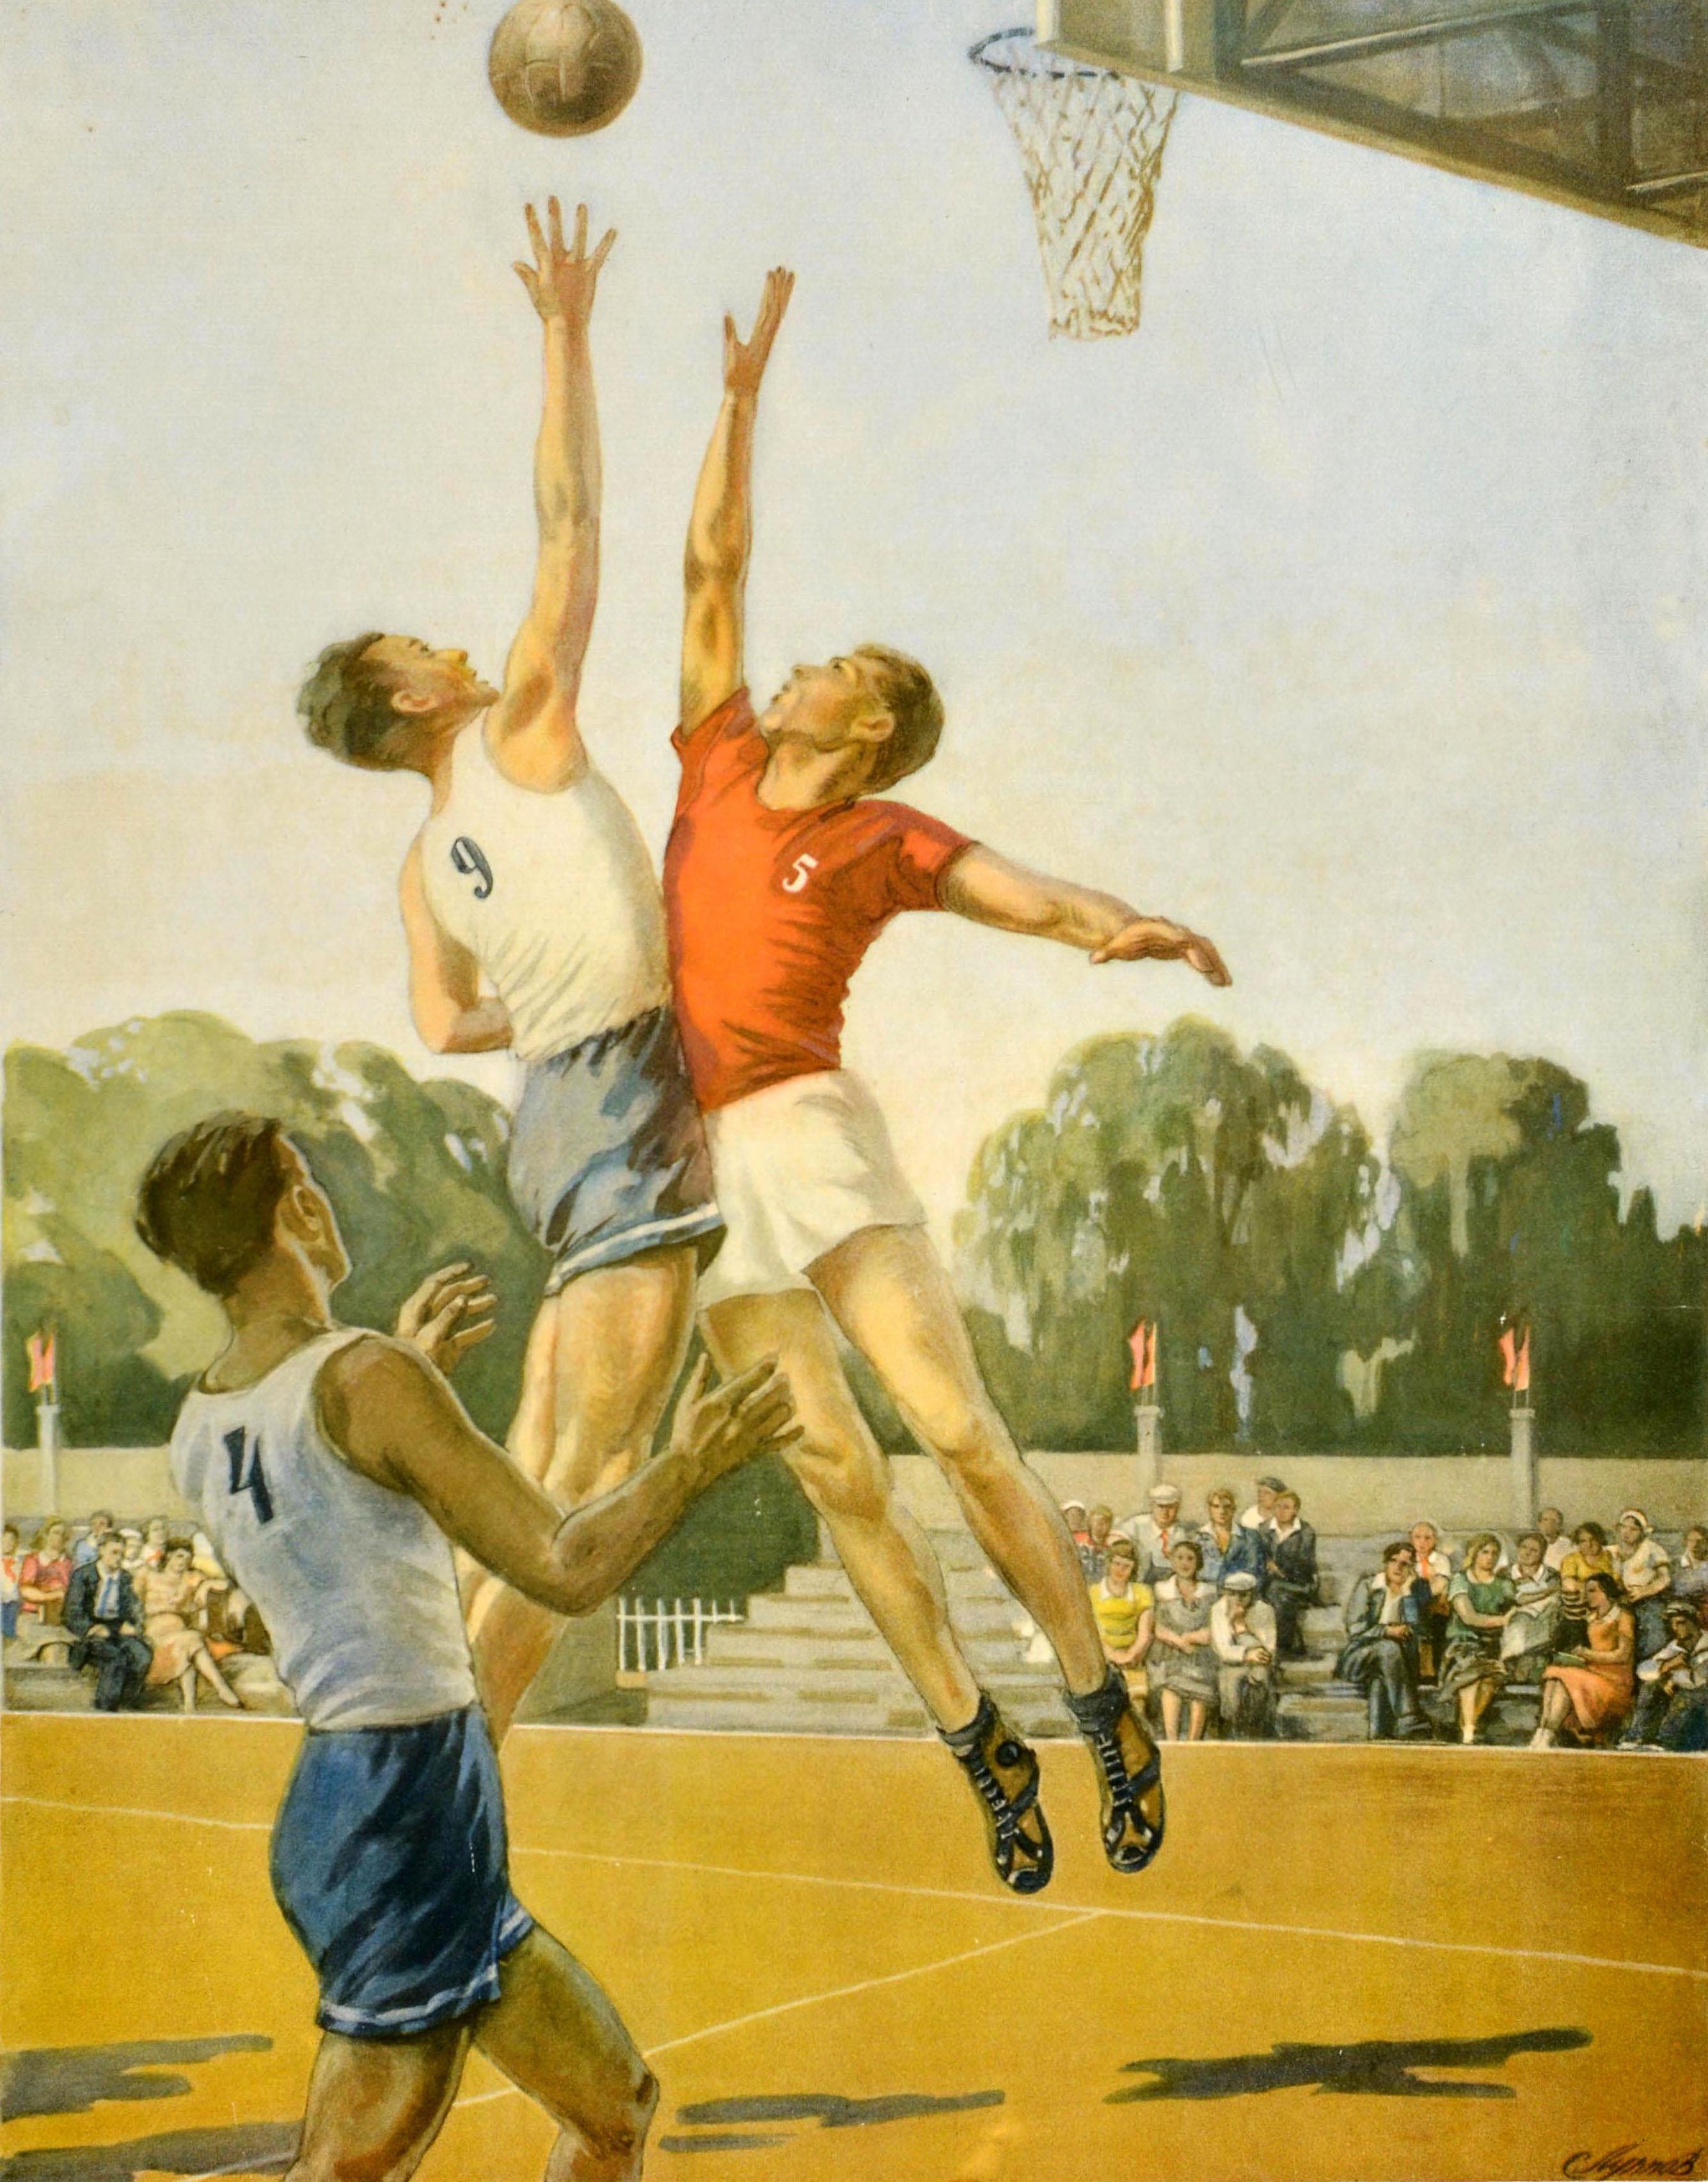 Original vintage Soviet sport poster -For mass character and skill in basketball! - featuring an illustration of two basketball players jumping for the ball by the net with spectators sitting below red flags flying on the stands in front of trees in